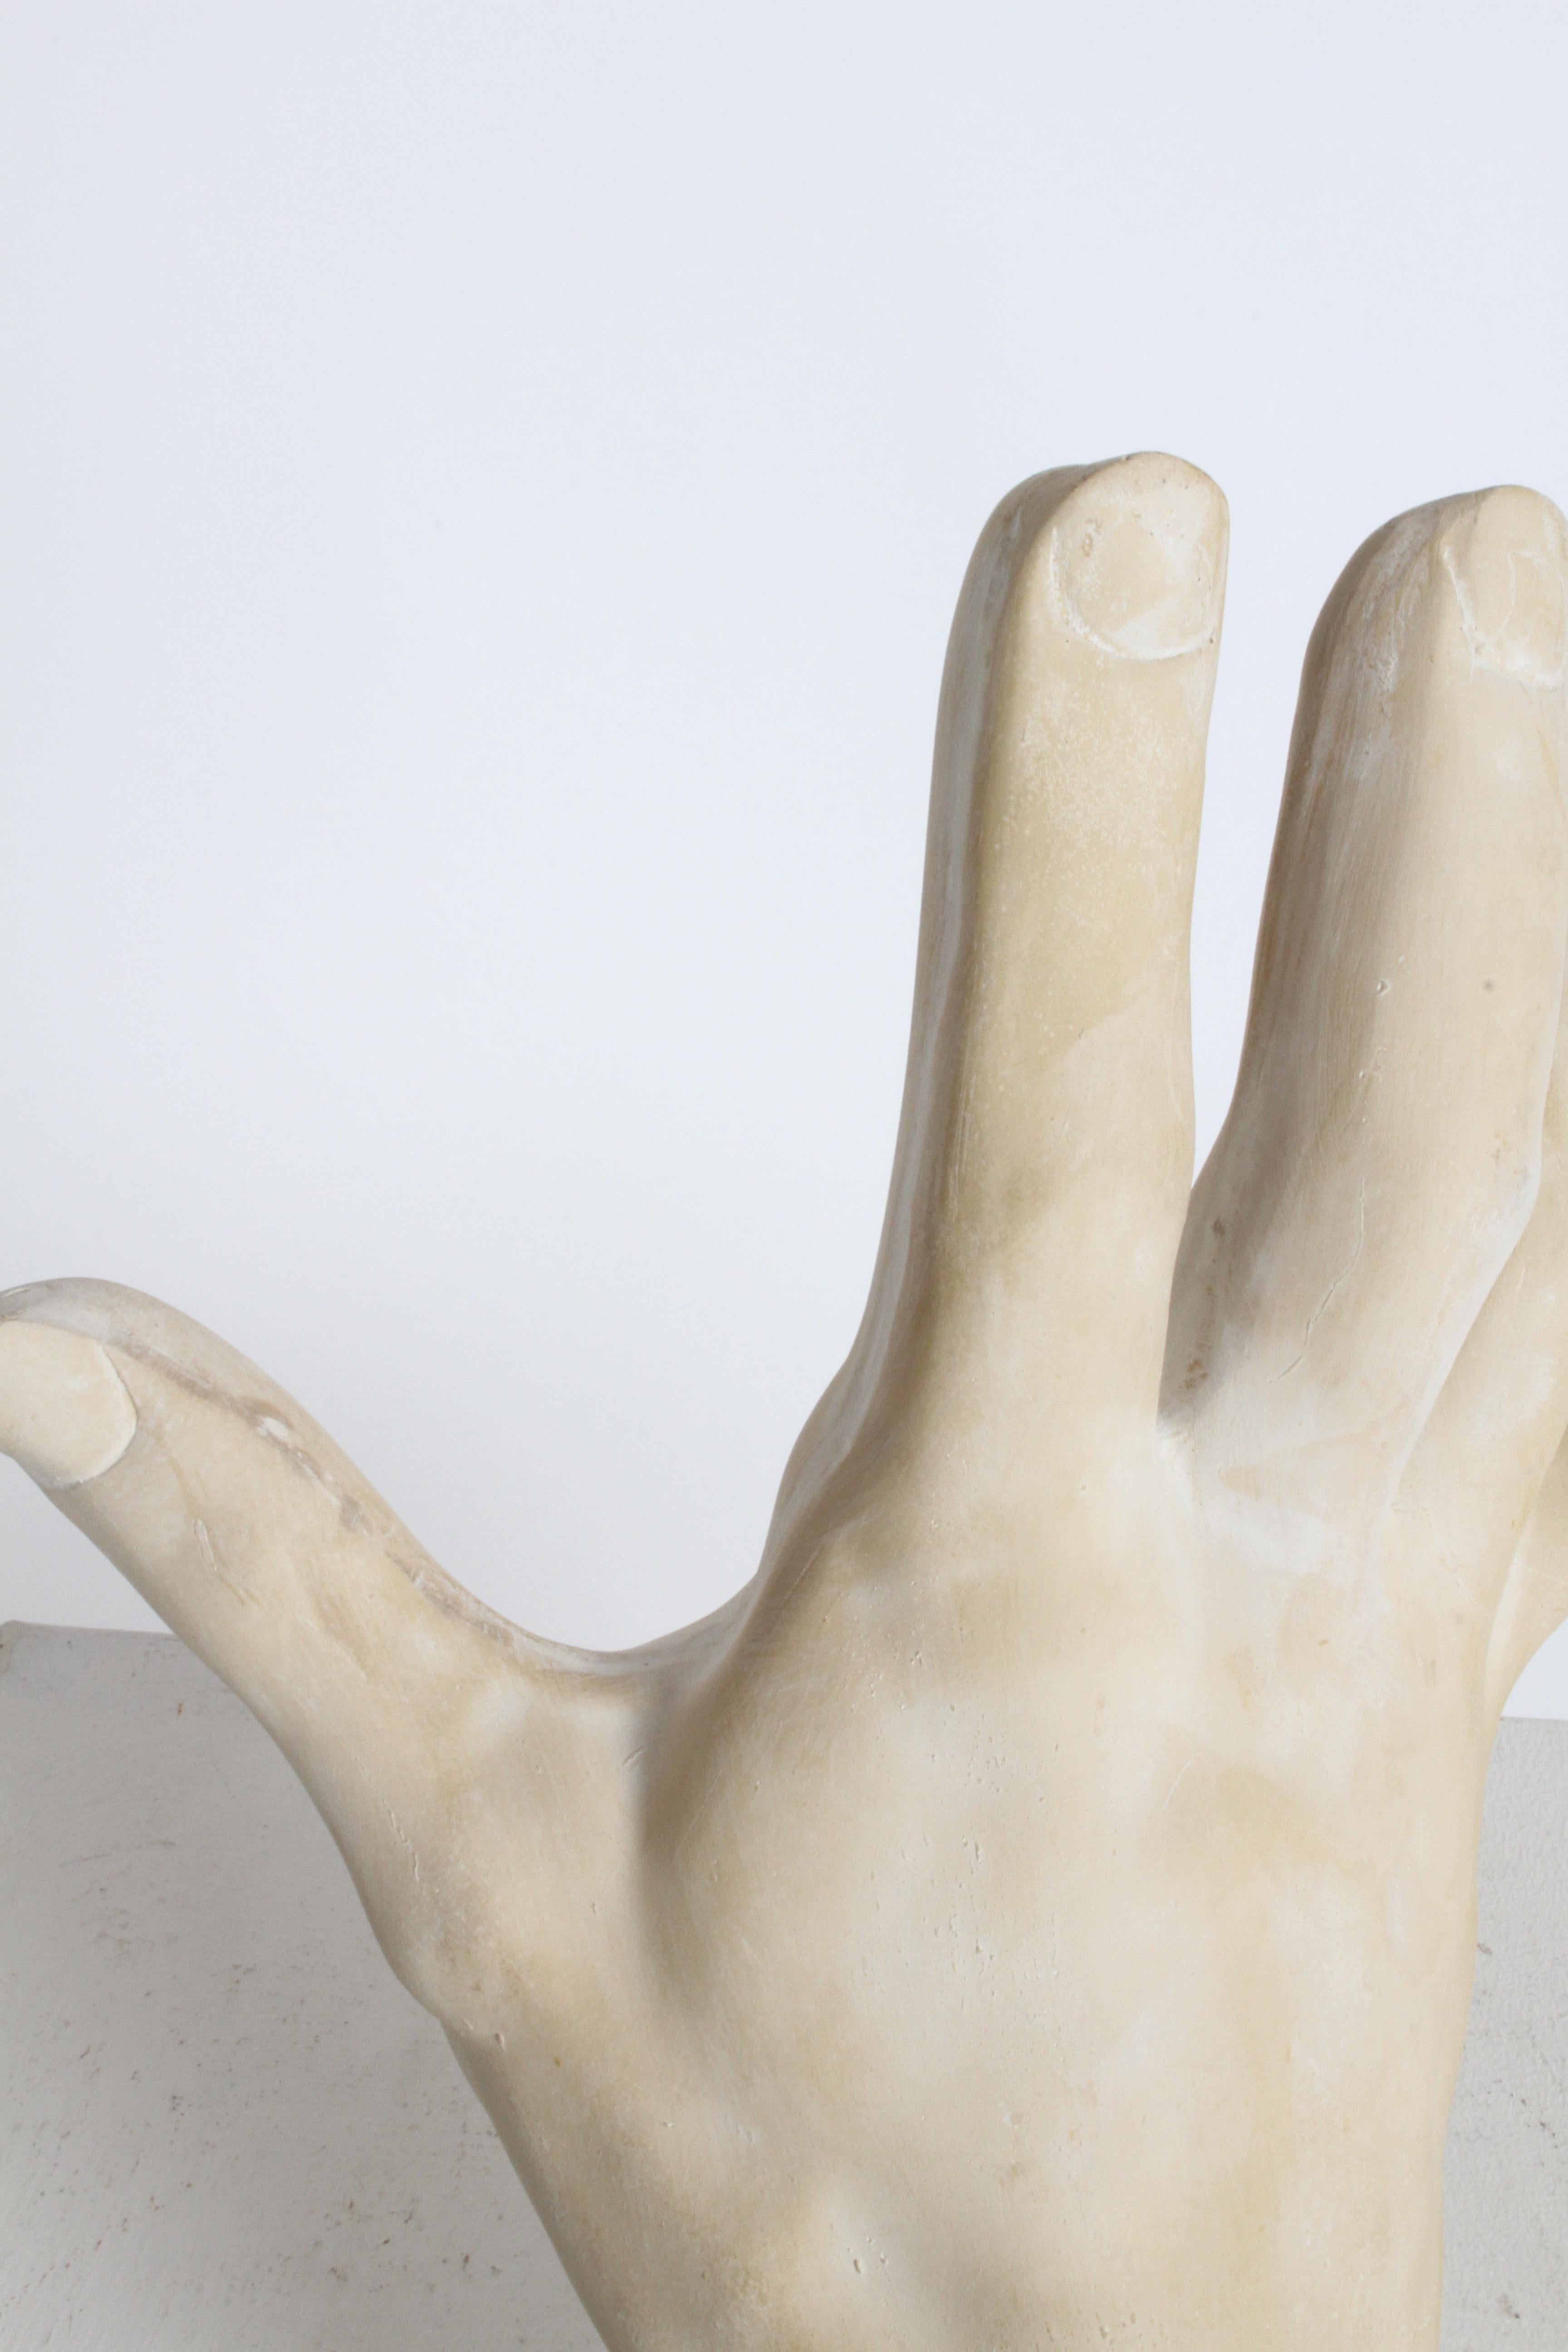 Large 1970s Plaster Artist Hand Study Table Sculpture, Style of John Dickinson For Sale 4